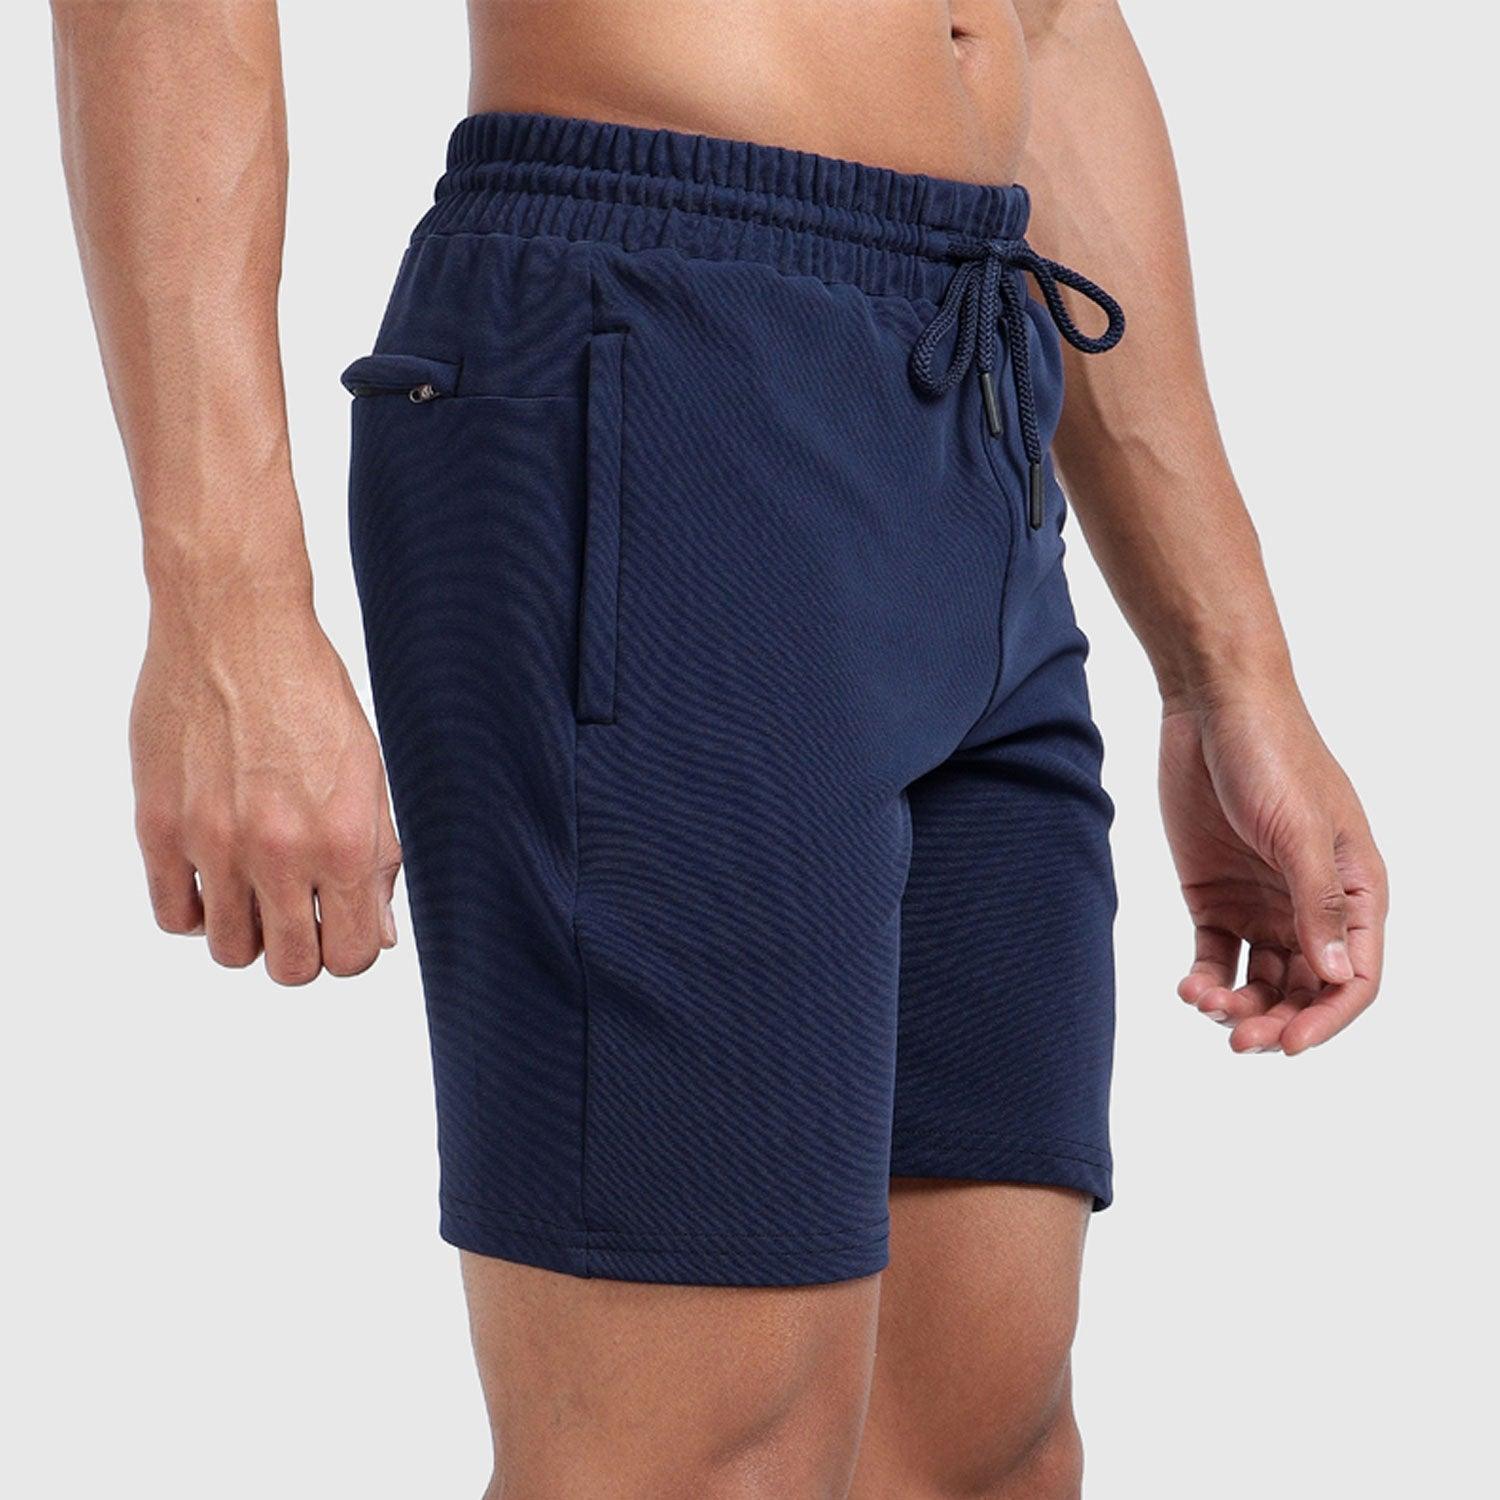 Denmonk's fashionable Trekready midnight navy shorts for men will boost your level of gym fitness.